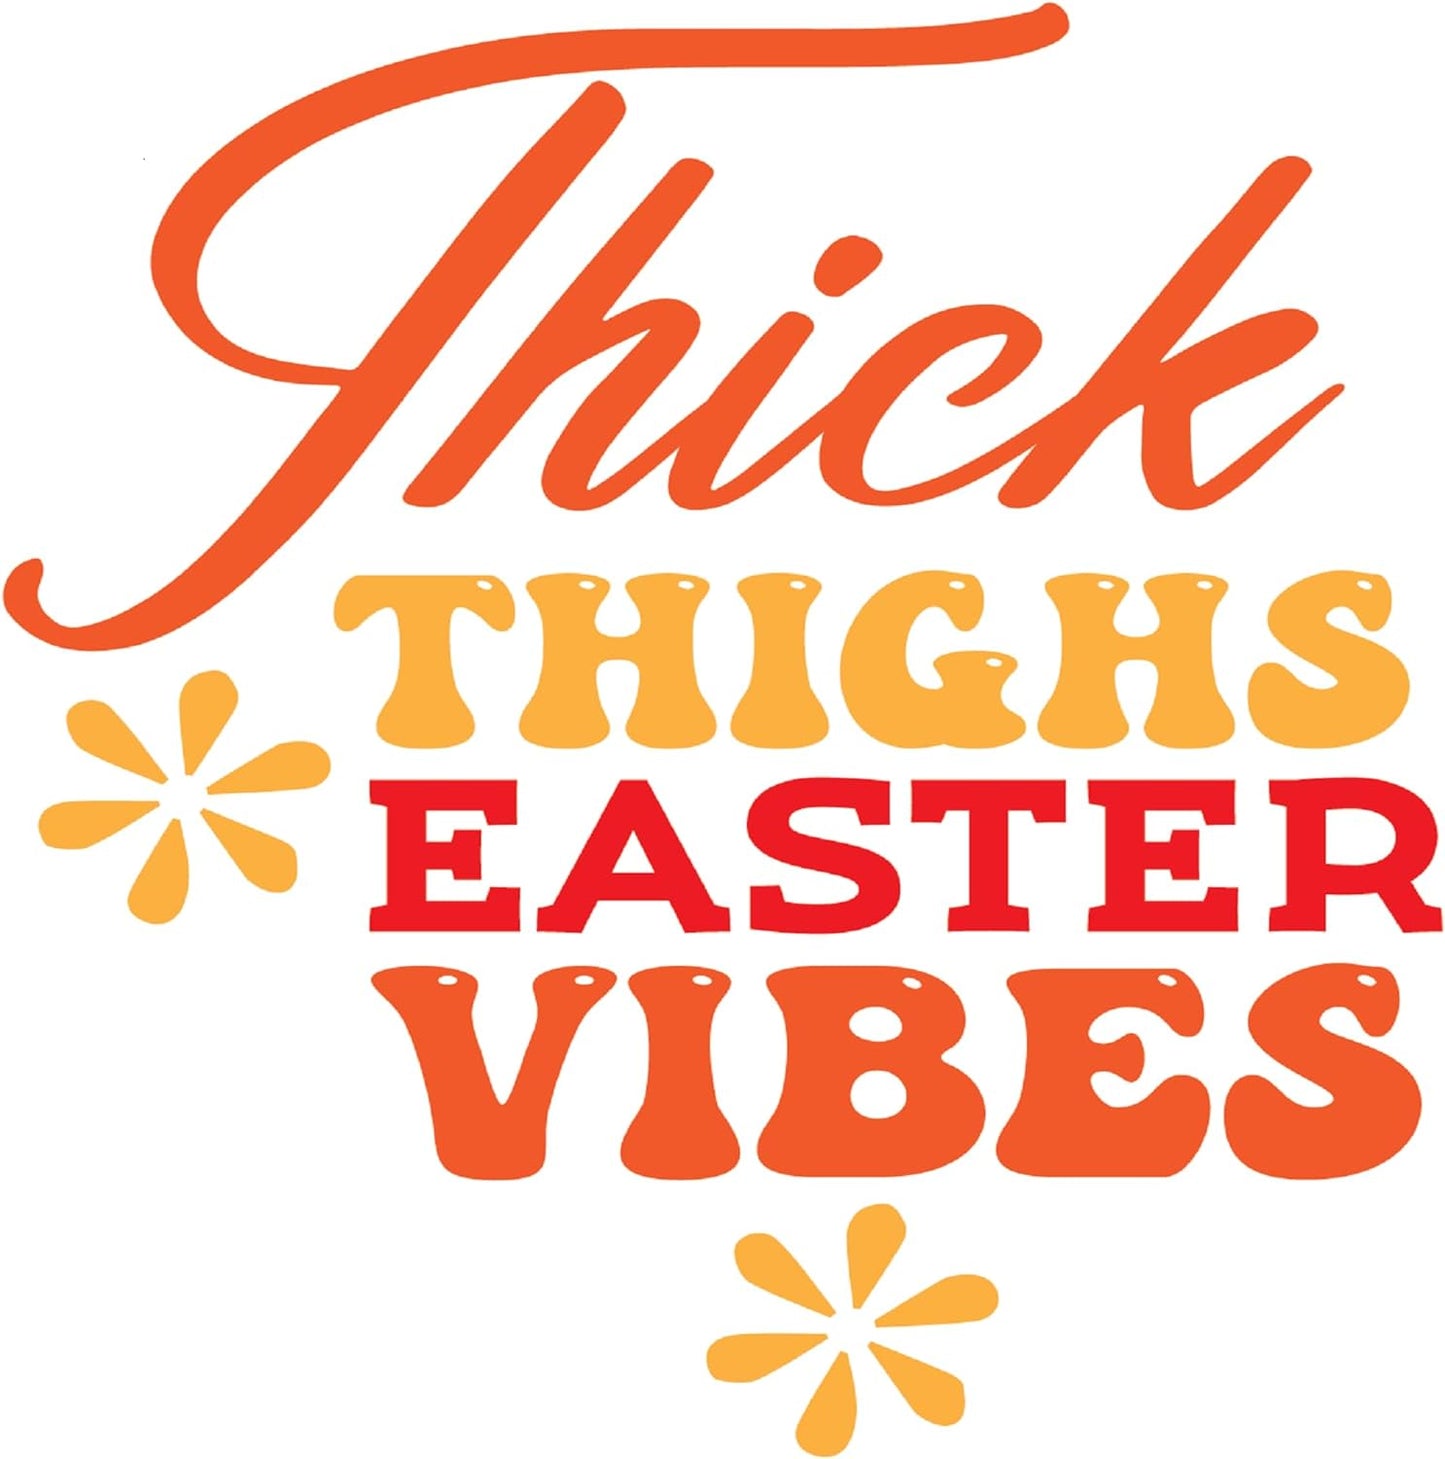 Inspirational Quote "Thick Thighs Easter Vibes" Motivational Sticker Vinyl Decal Motivation Stickers- 5" Vinyl Sticker Waterproof